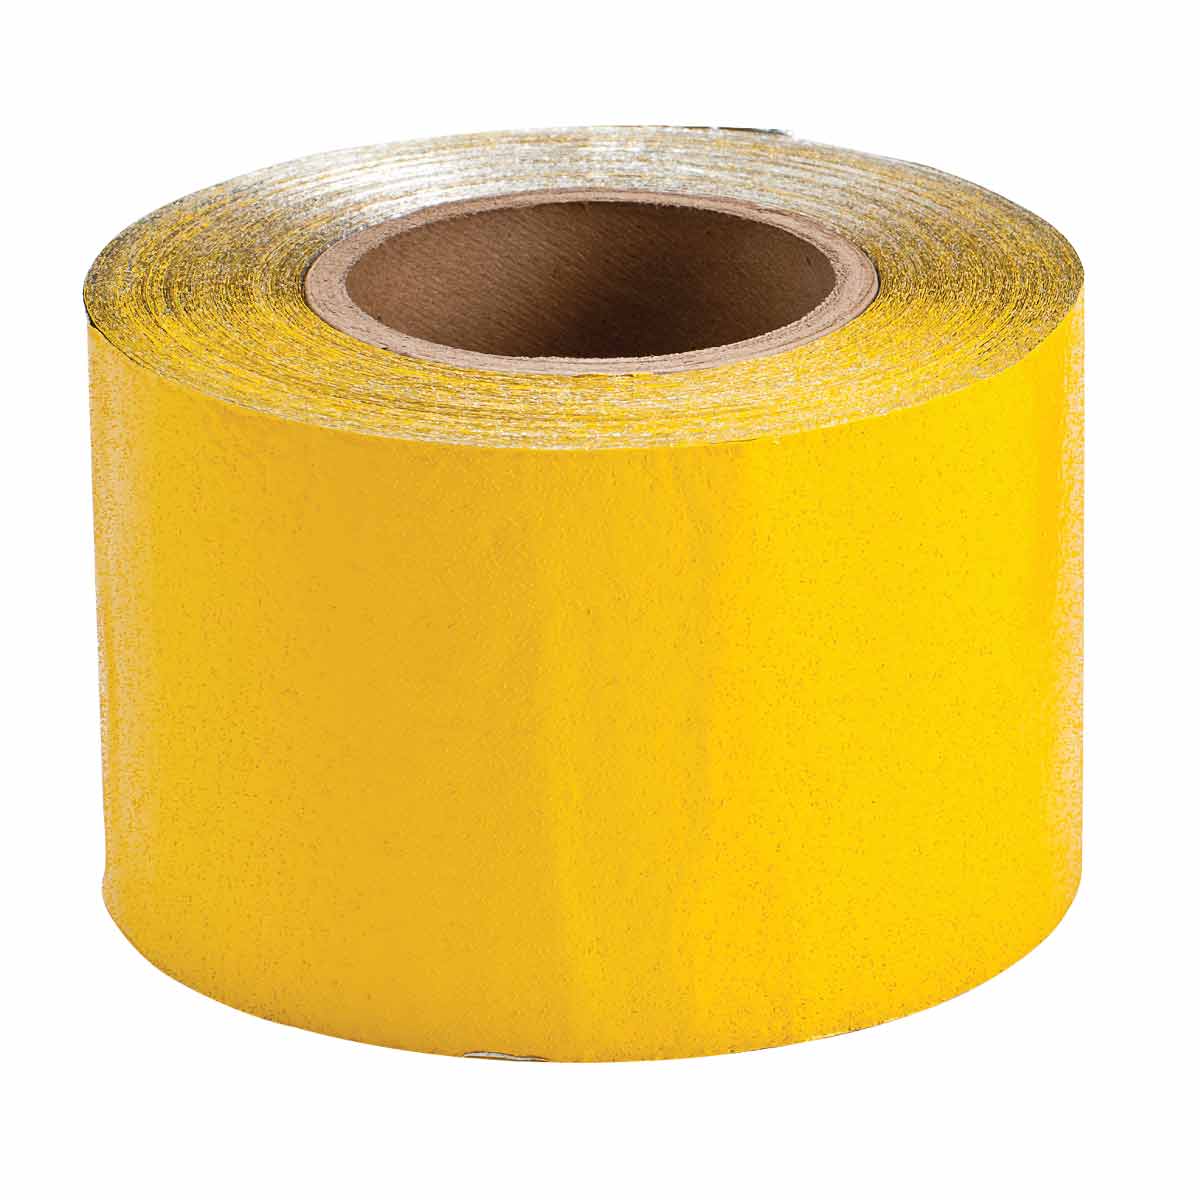 Tapco 045-00151 Temporary Construction Reflective Striping Tape Yellow 50 yds Length x 4 Width 